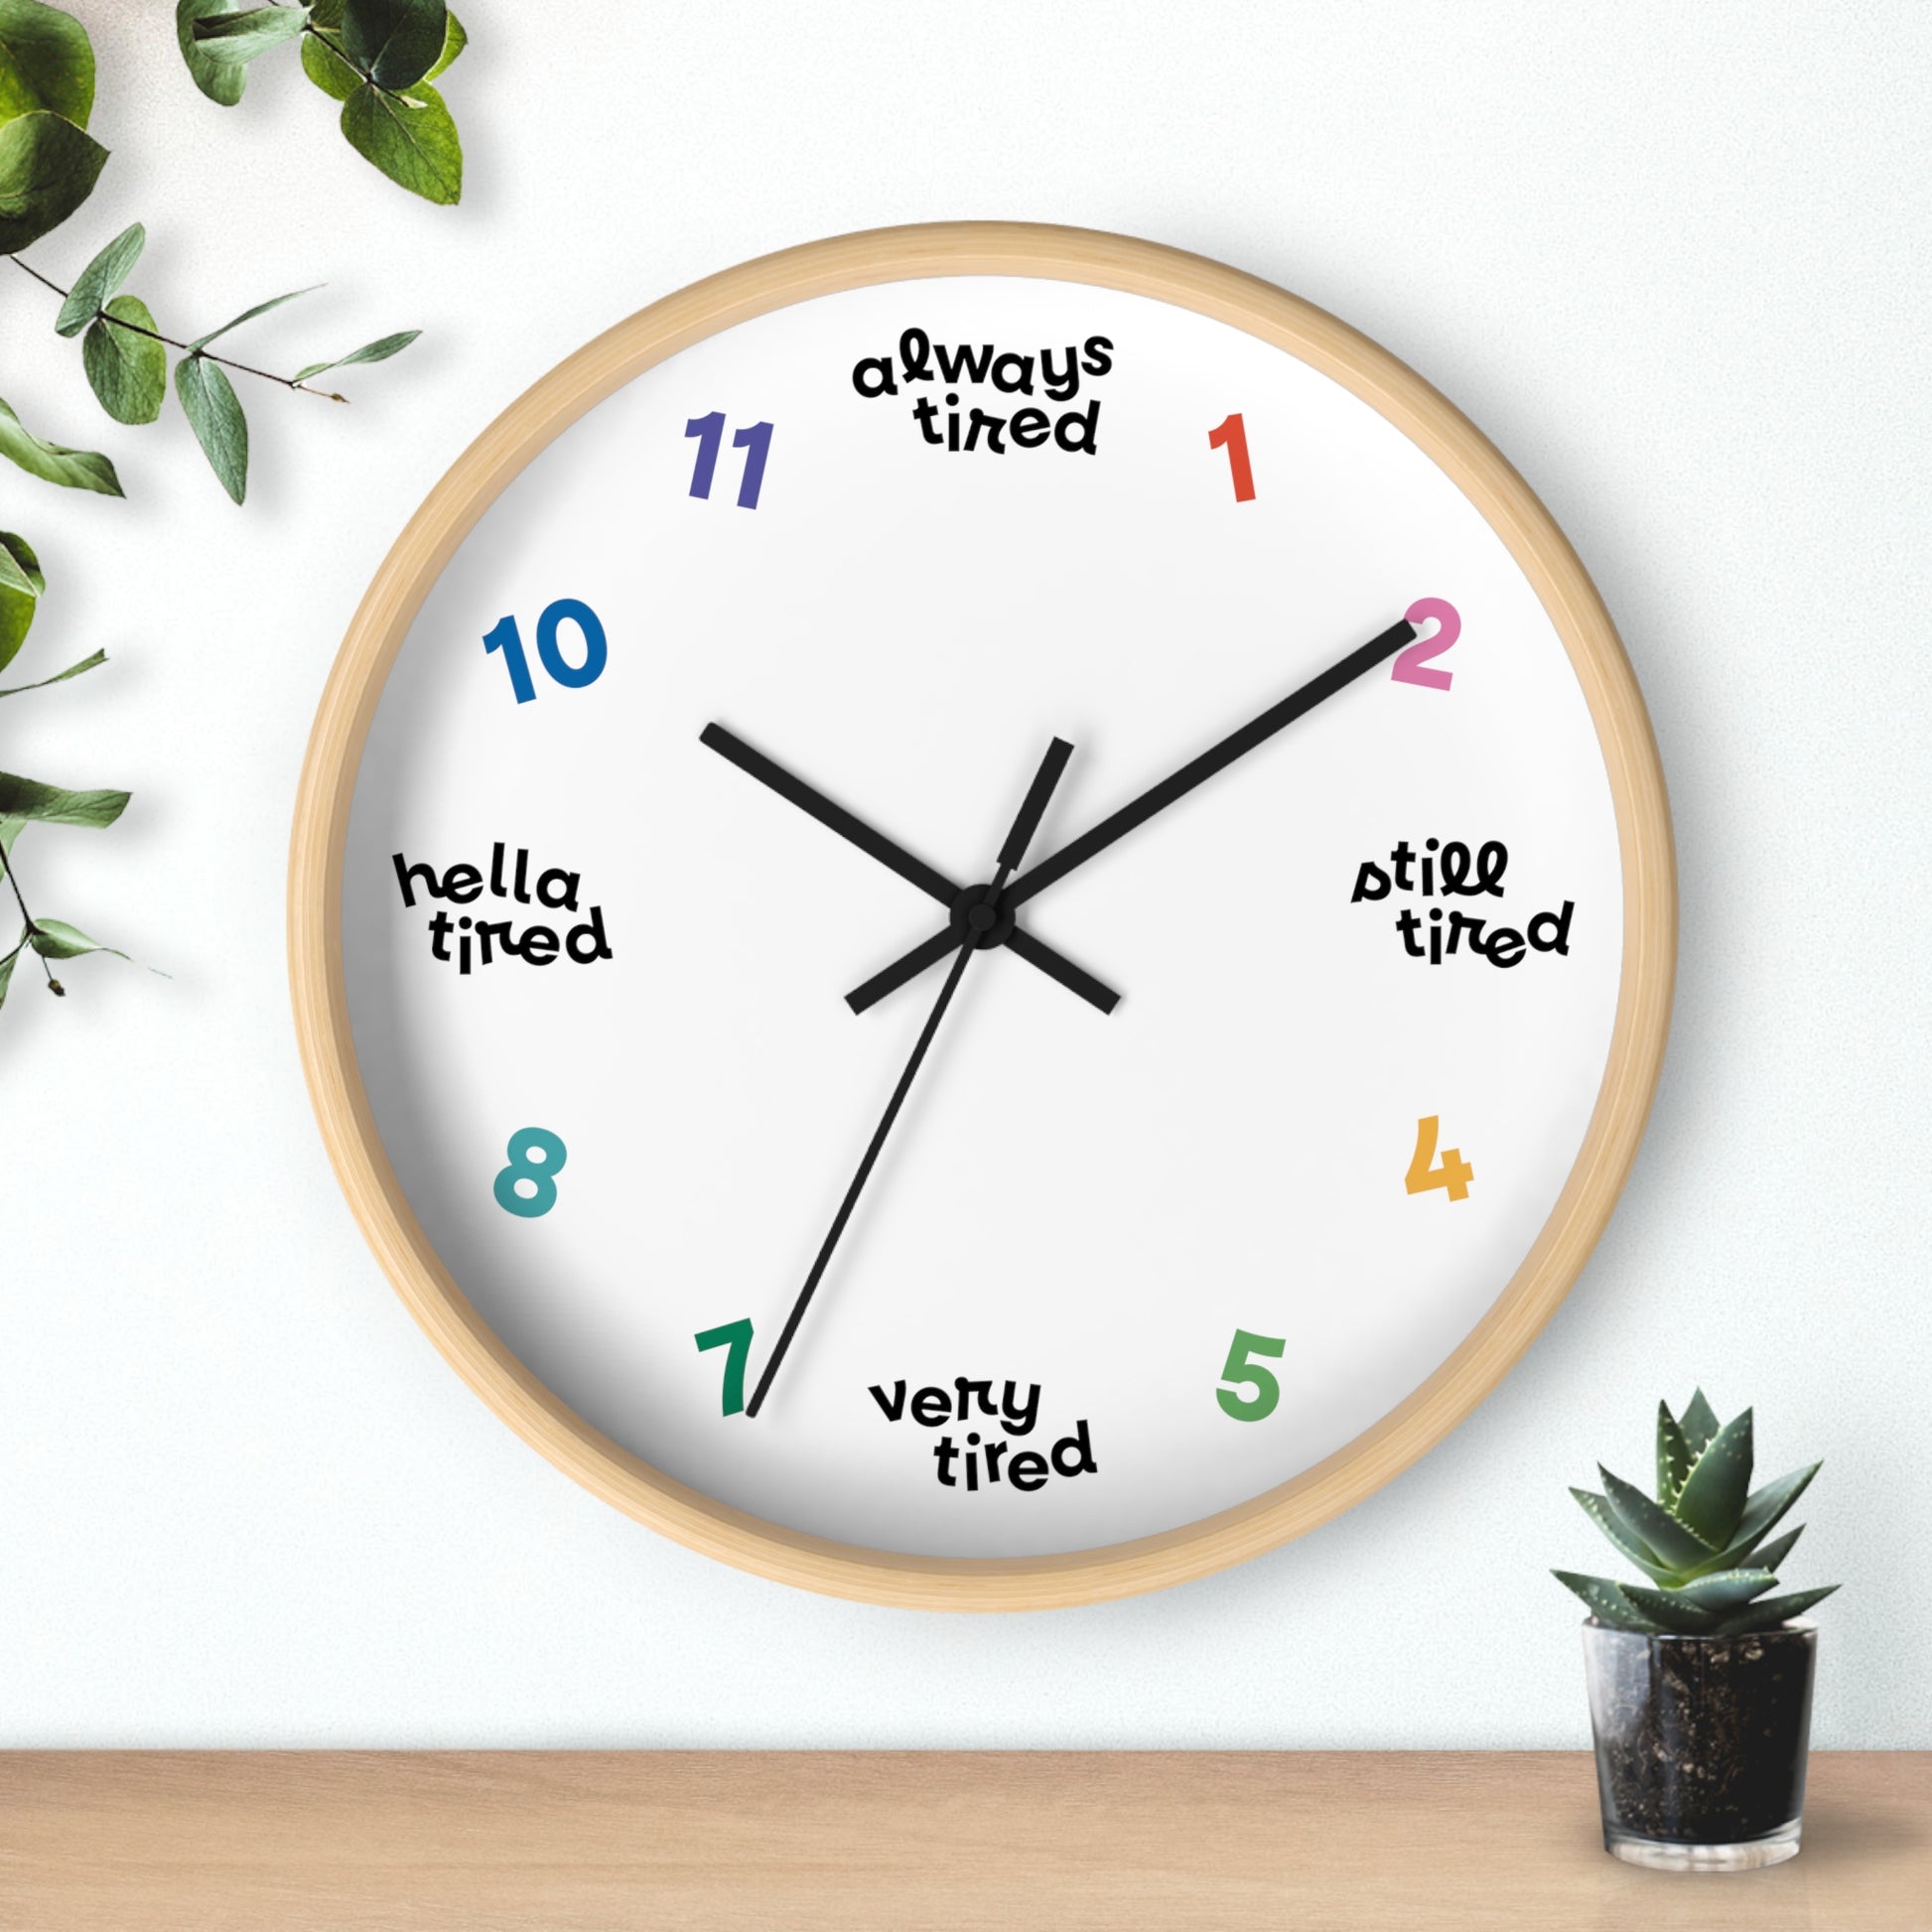 Hanging wall clock with a swedish minimal design. On 4 quadrants, there are variations of "tired" instead of the hour markers. The remaining numbers are cheerful bright colors. This clock has a wooden frame.